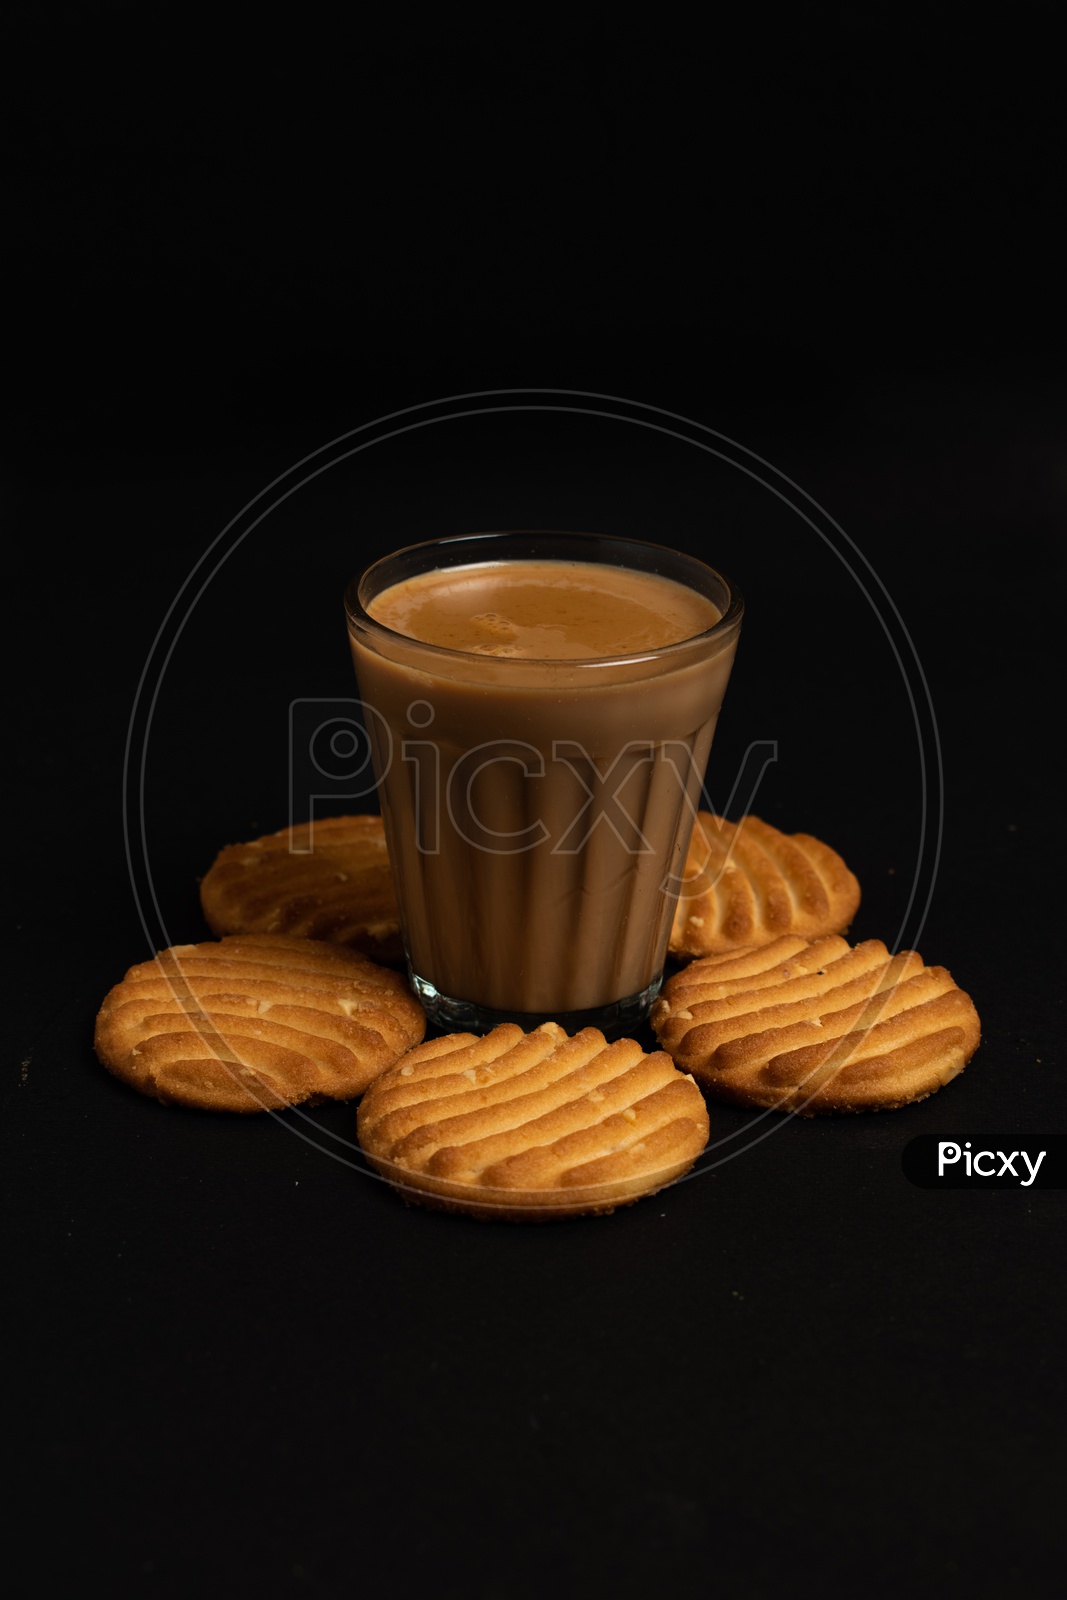 Aromatic beverage Tea/chai   with Good-day biscuits placed  on a black background.